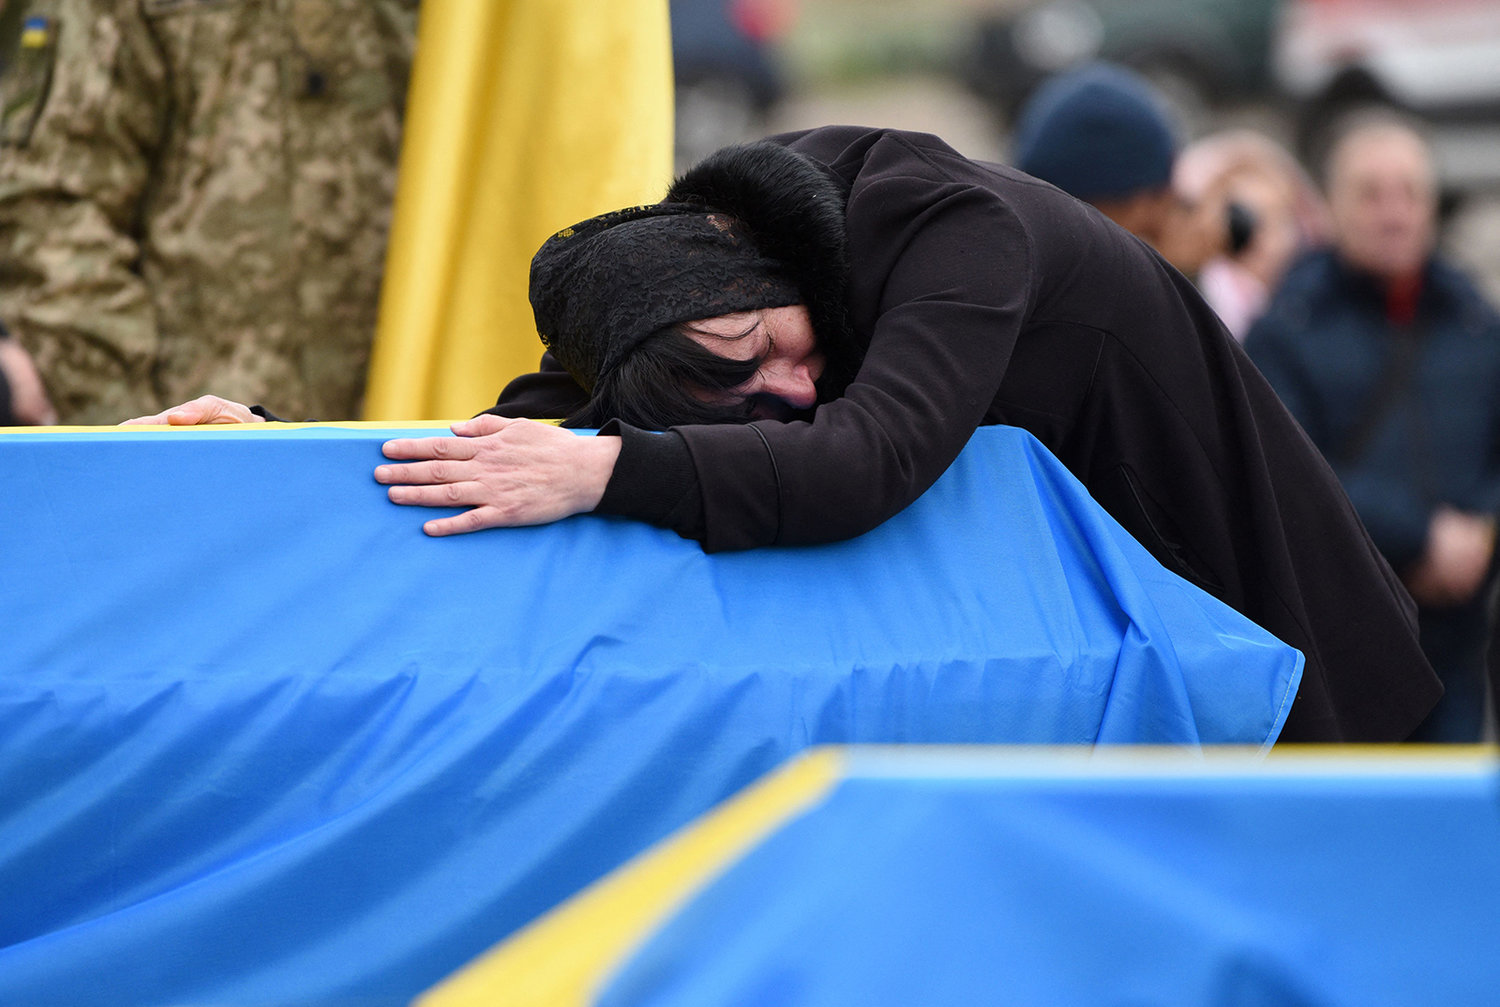 The mother of Ukrainian soldier Lubomyr Hudzeliak, who was killed during Russia's invasion of Ukraine, mourns over his flag-draped coffin during his funeral at the Lychakiv cemetery, in the western Ukrainian city of Lviv on April 6, 2022. Nearly 35,000 Ukrainians fled west in 24 hours to escape the Russian war in their country, the United Nations said on April 6, 2022, after Russia invaded Ukraine on Feb. 24, 2022. (Yuriy Dyachyshyn/AFP via Getty Images/TNS)